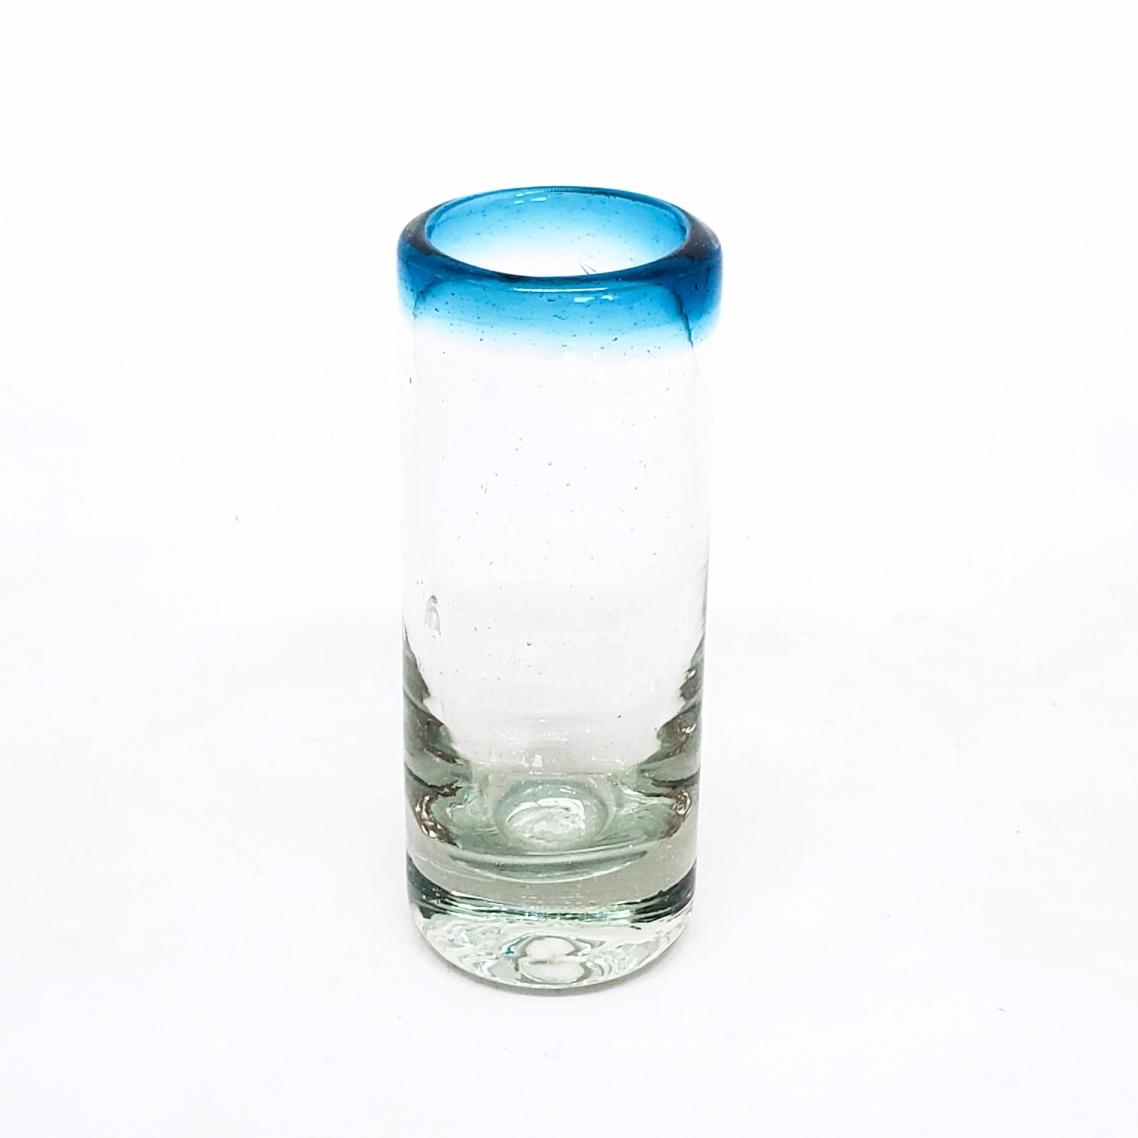 MEXICAN GLASSWARE / Aqua Blue Rim 2 oz Tequila Shot Glasses (set of 6) / Reminiscent of the turquoise Caribbean waters of Tulum, our Aqua Blue Rim shot glasses are perfect for enjoying mezcal or any other liquor.